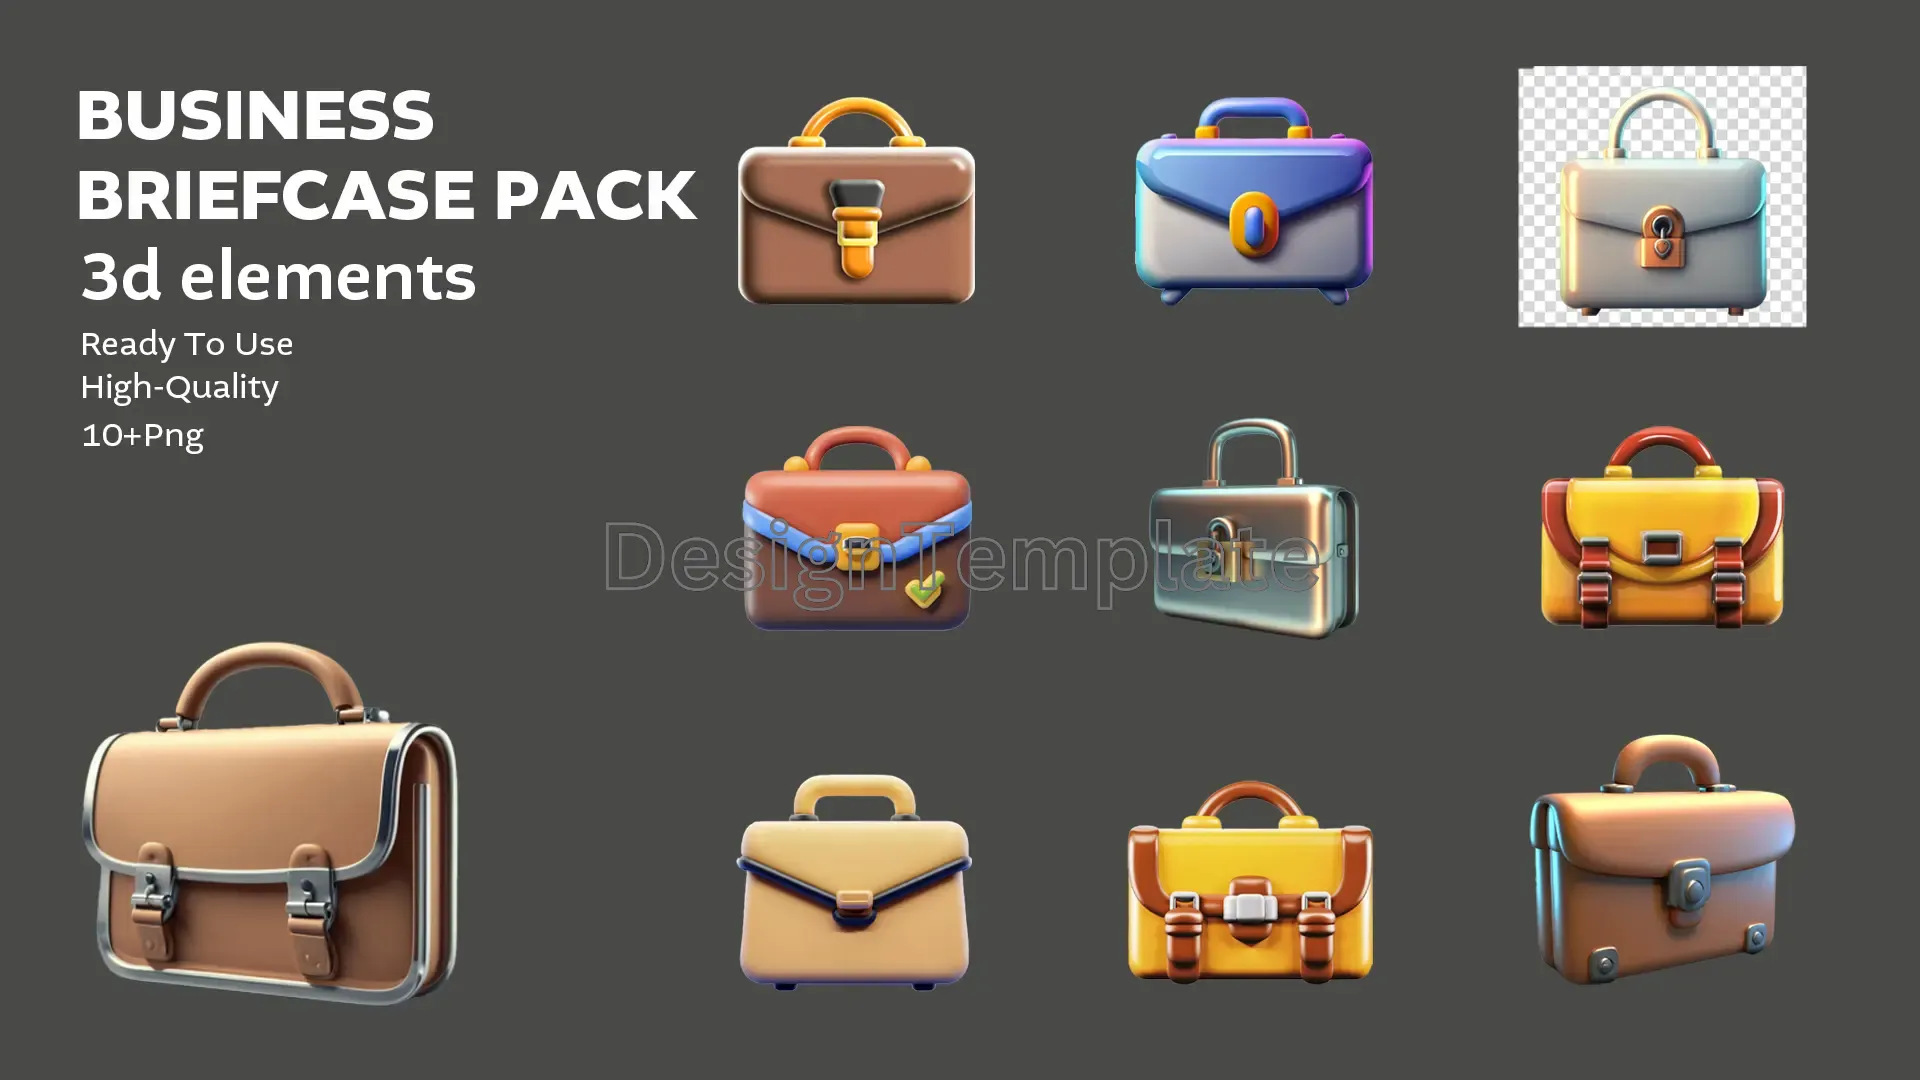 Professional Gear Business Briefcase 3D Elements Pack image